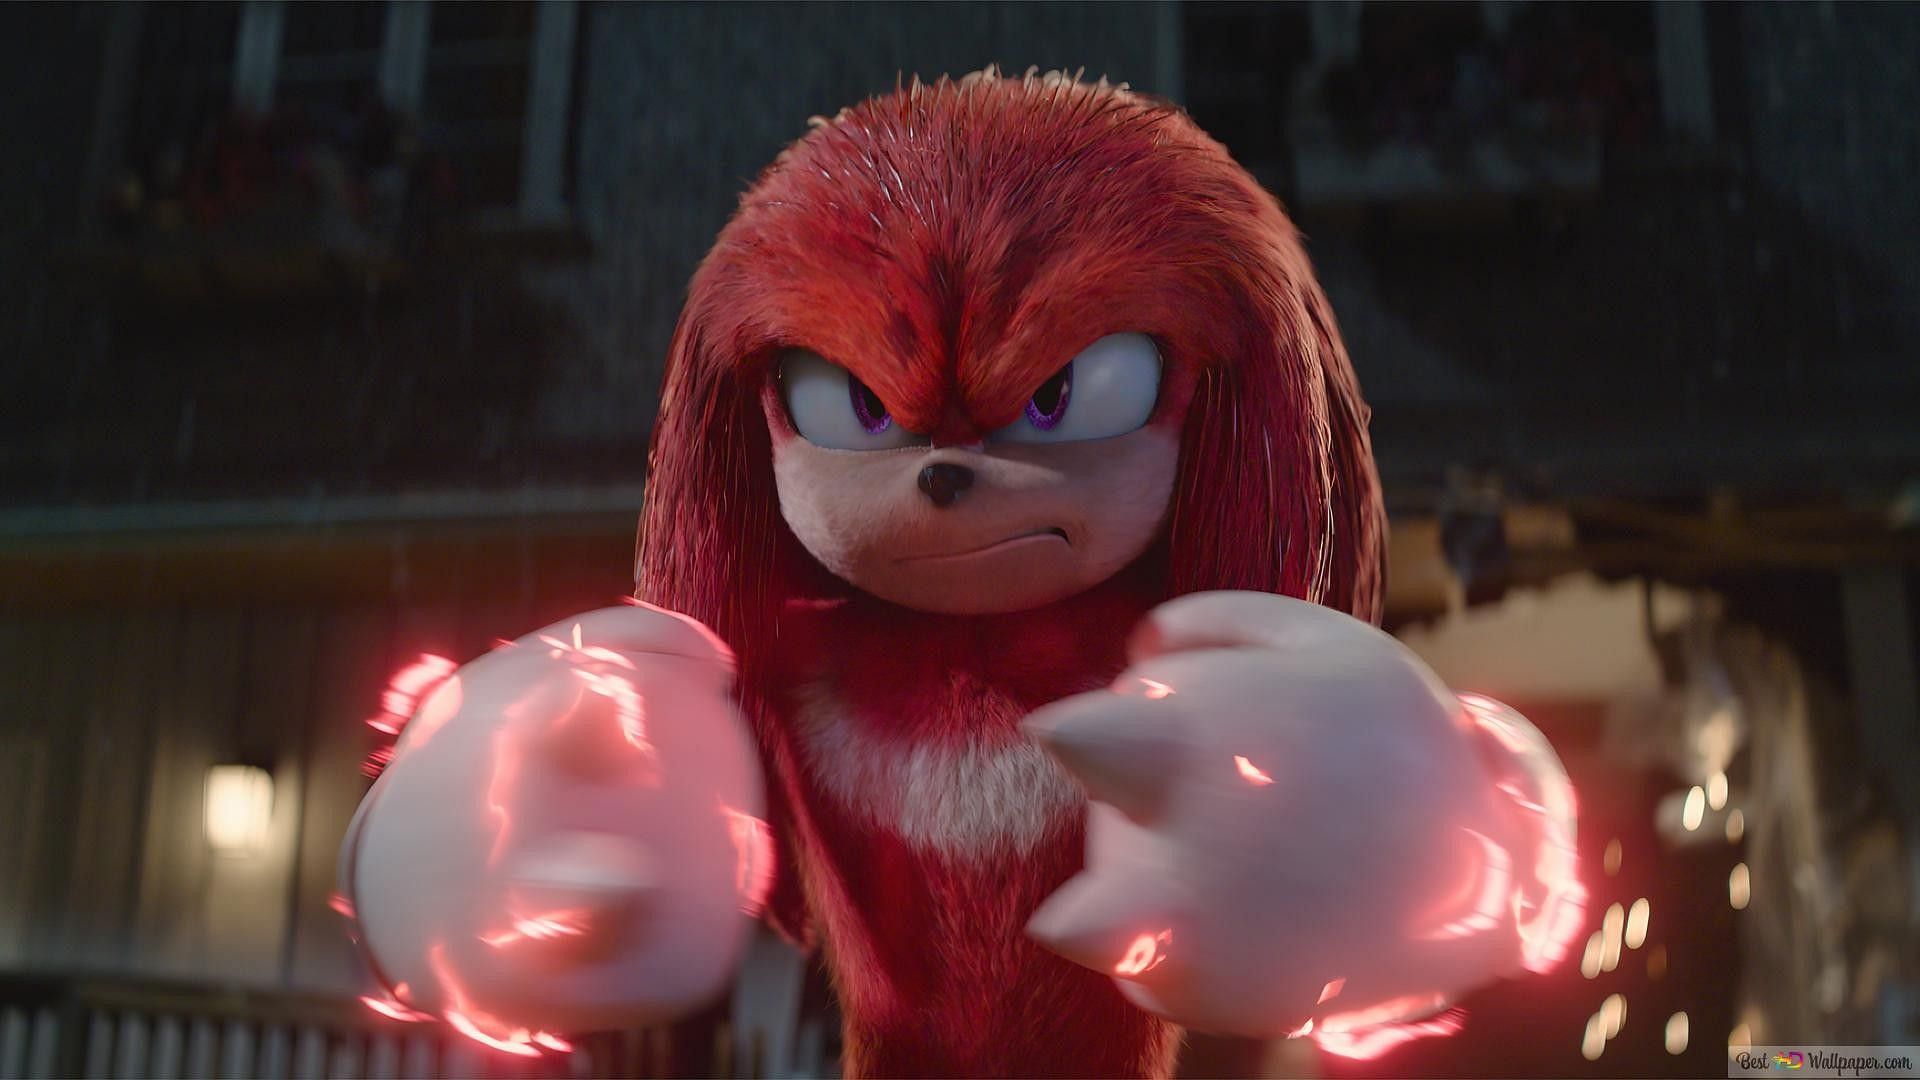 Knuckles with his spiked gloves in the Sonic movies (image via SEGA)